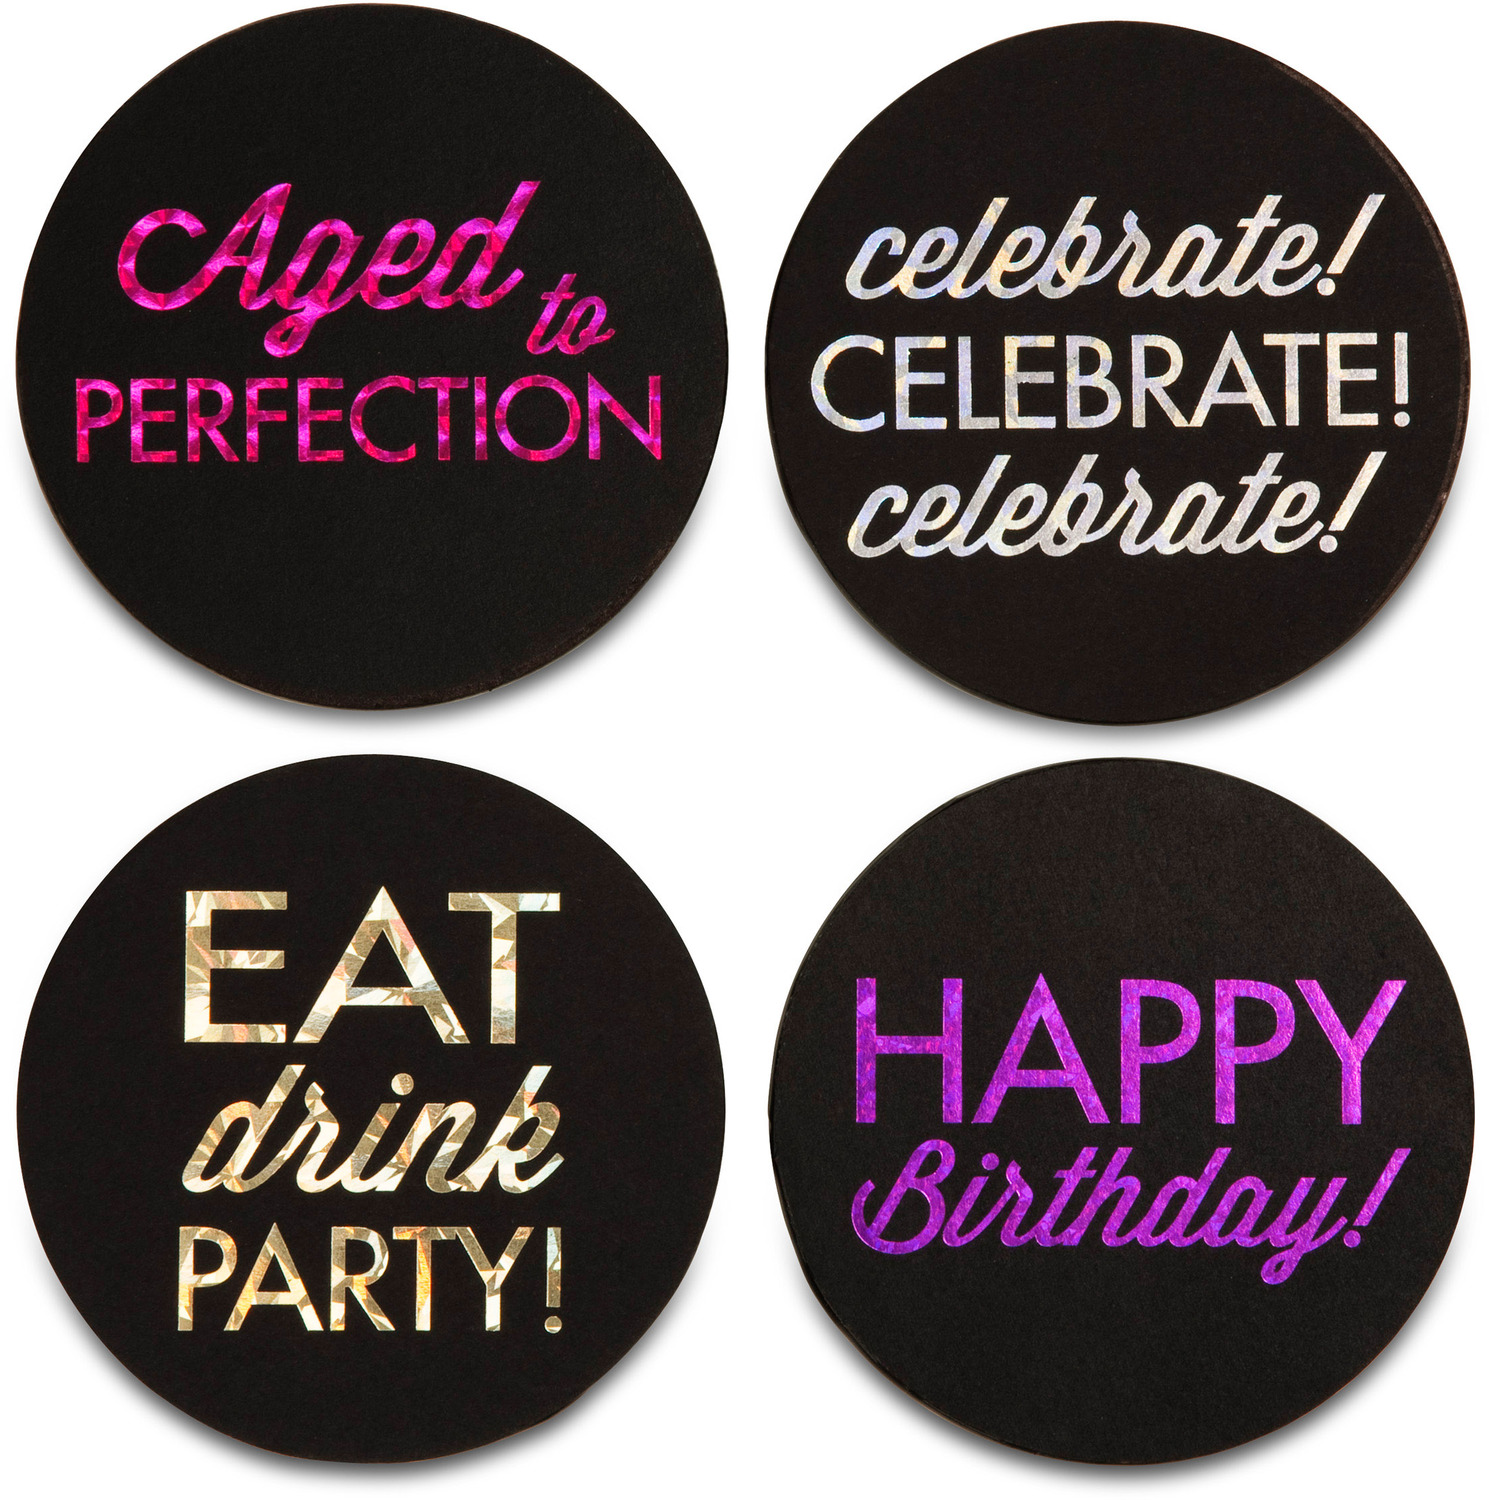 Happy Birthday by Hiccup - Happy Birthday - 4" Round Coasters (Set of 4)